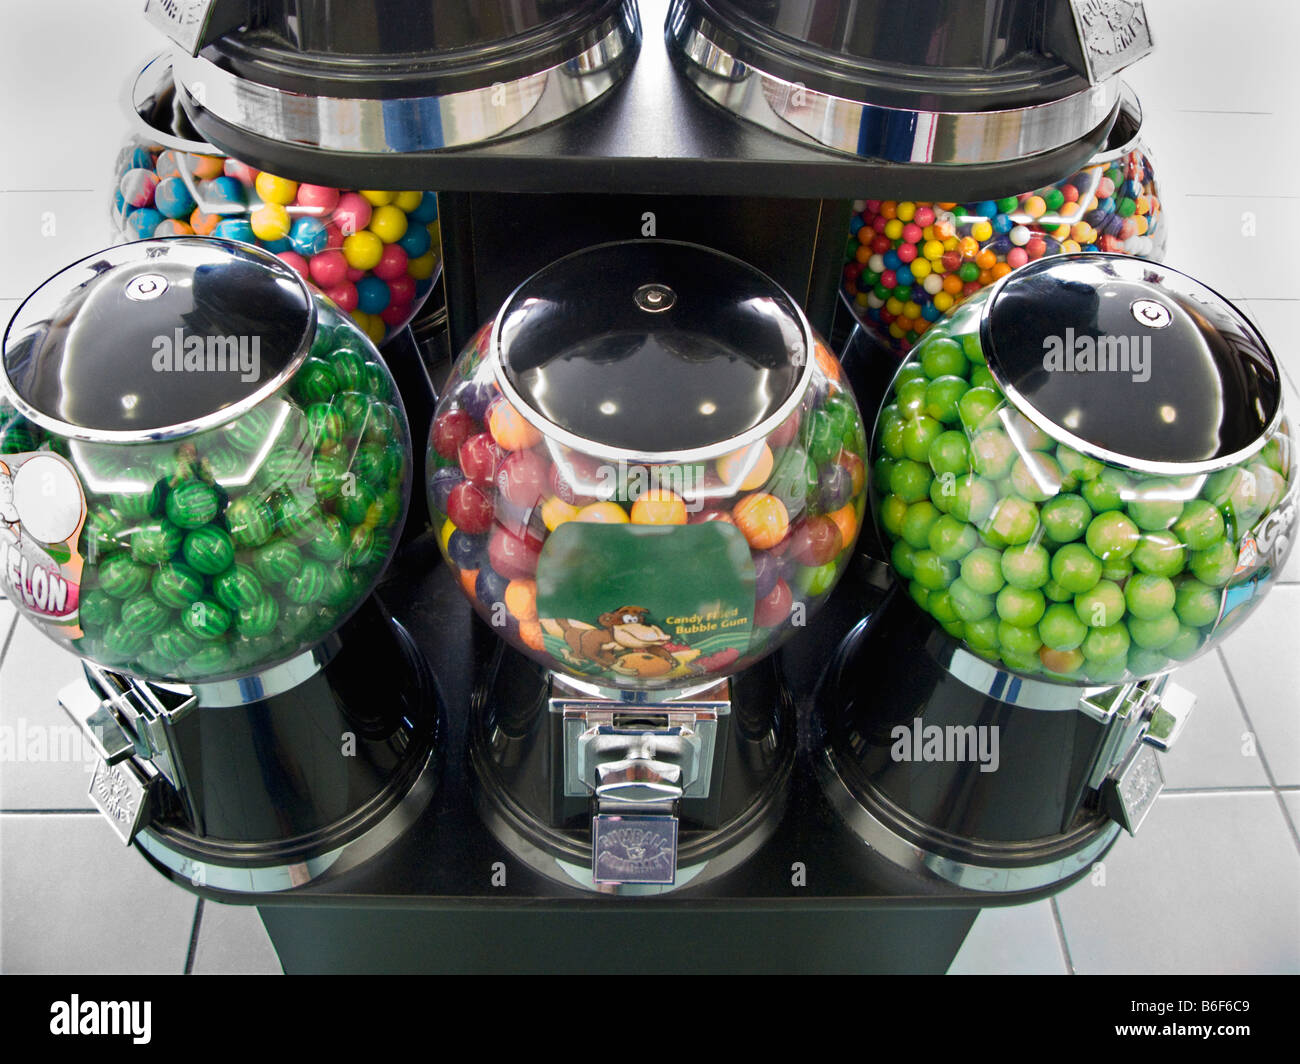 Several coin operated gumball machines Stock Photo